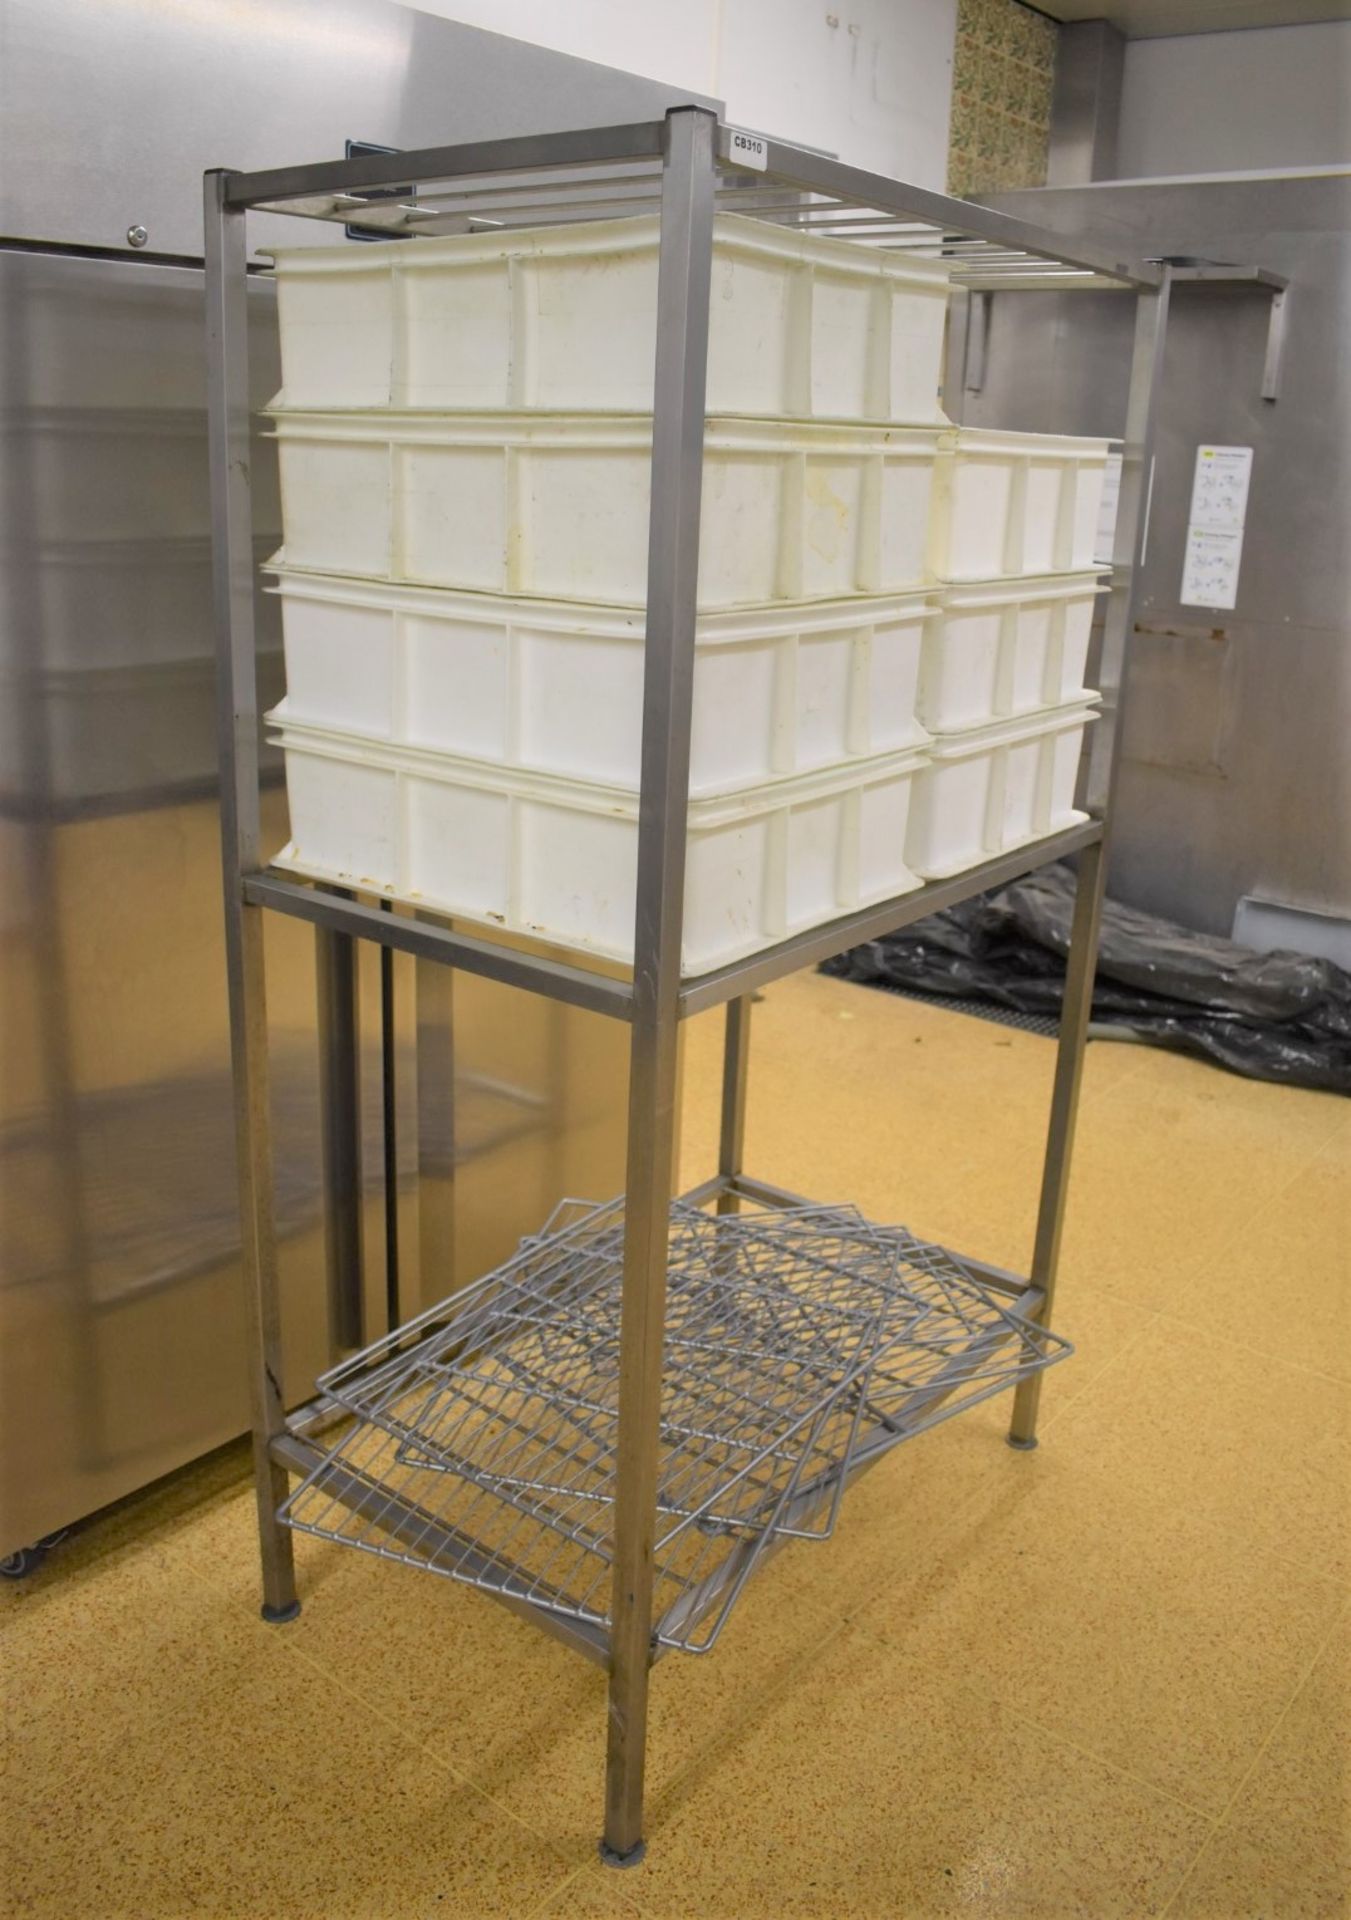 1 x Stainless Steel  Upright Unit With Rail Shelves - H170 x W100 x D60 cms - CL455 - Ref CB310 -